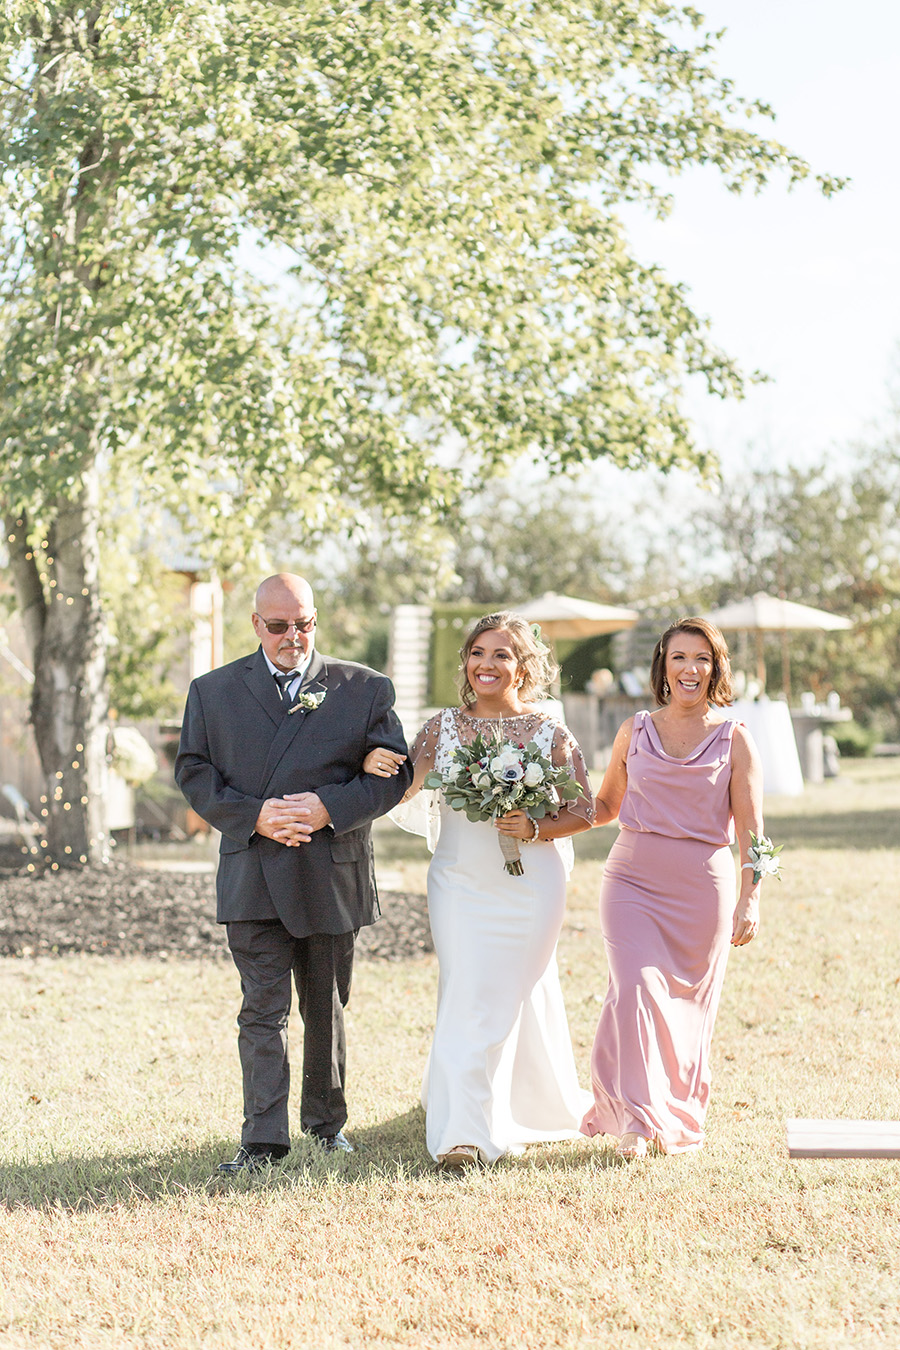 Brides walks down the aisle with her parents